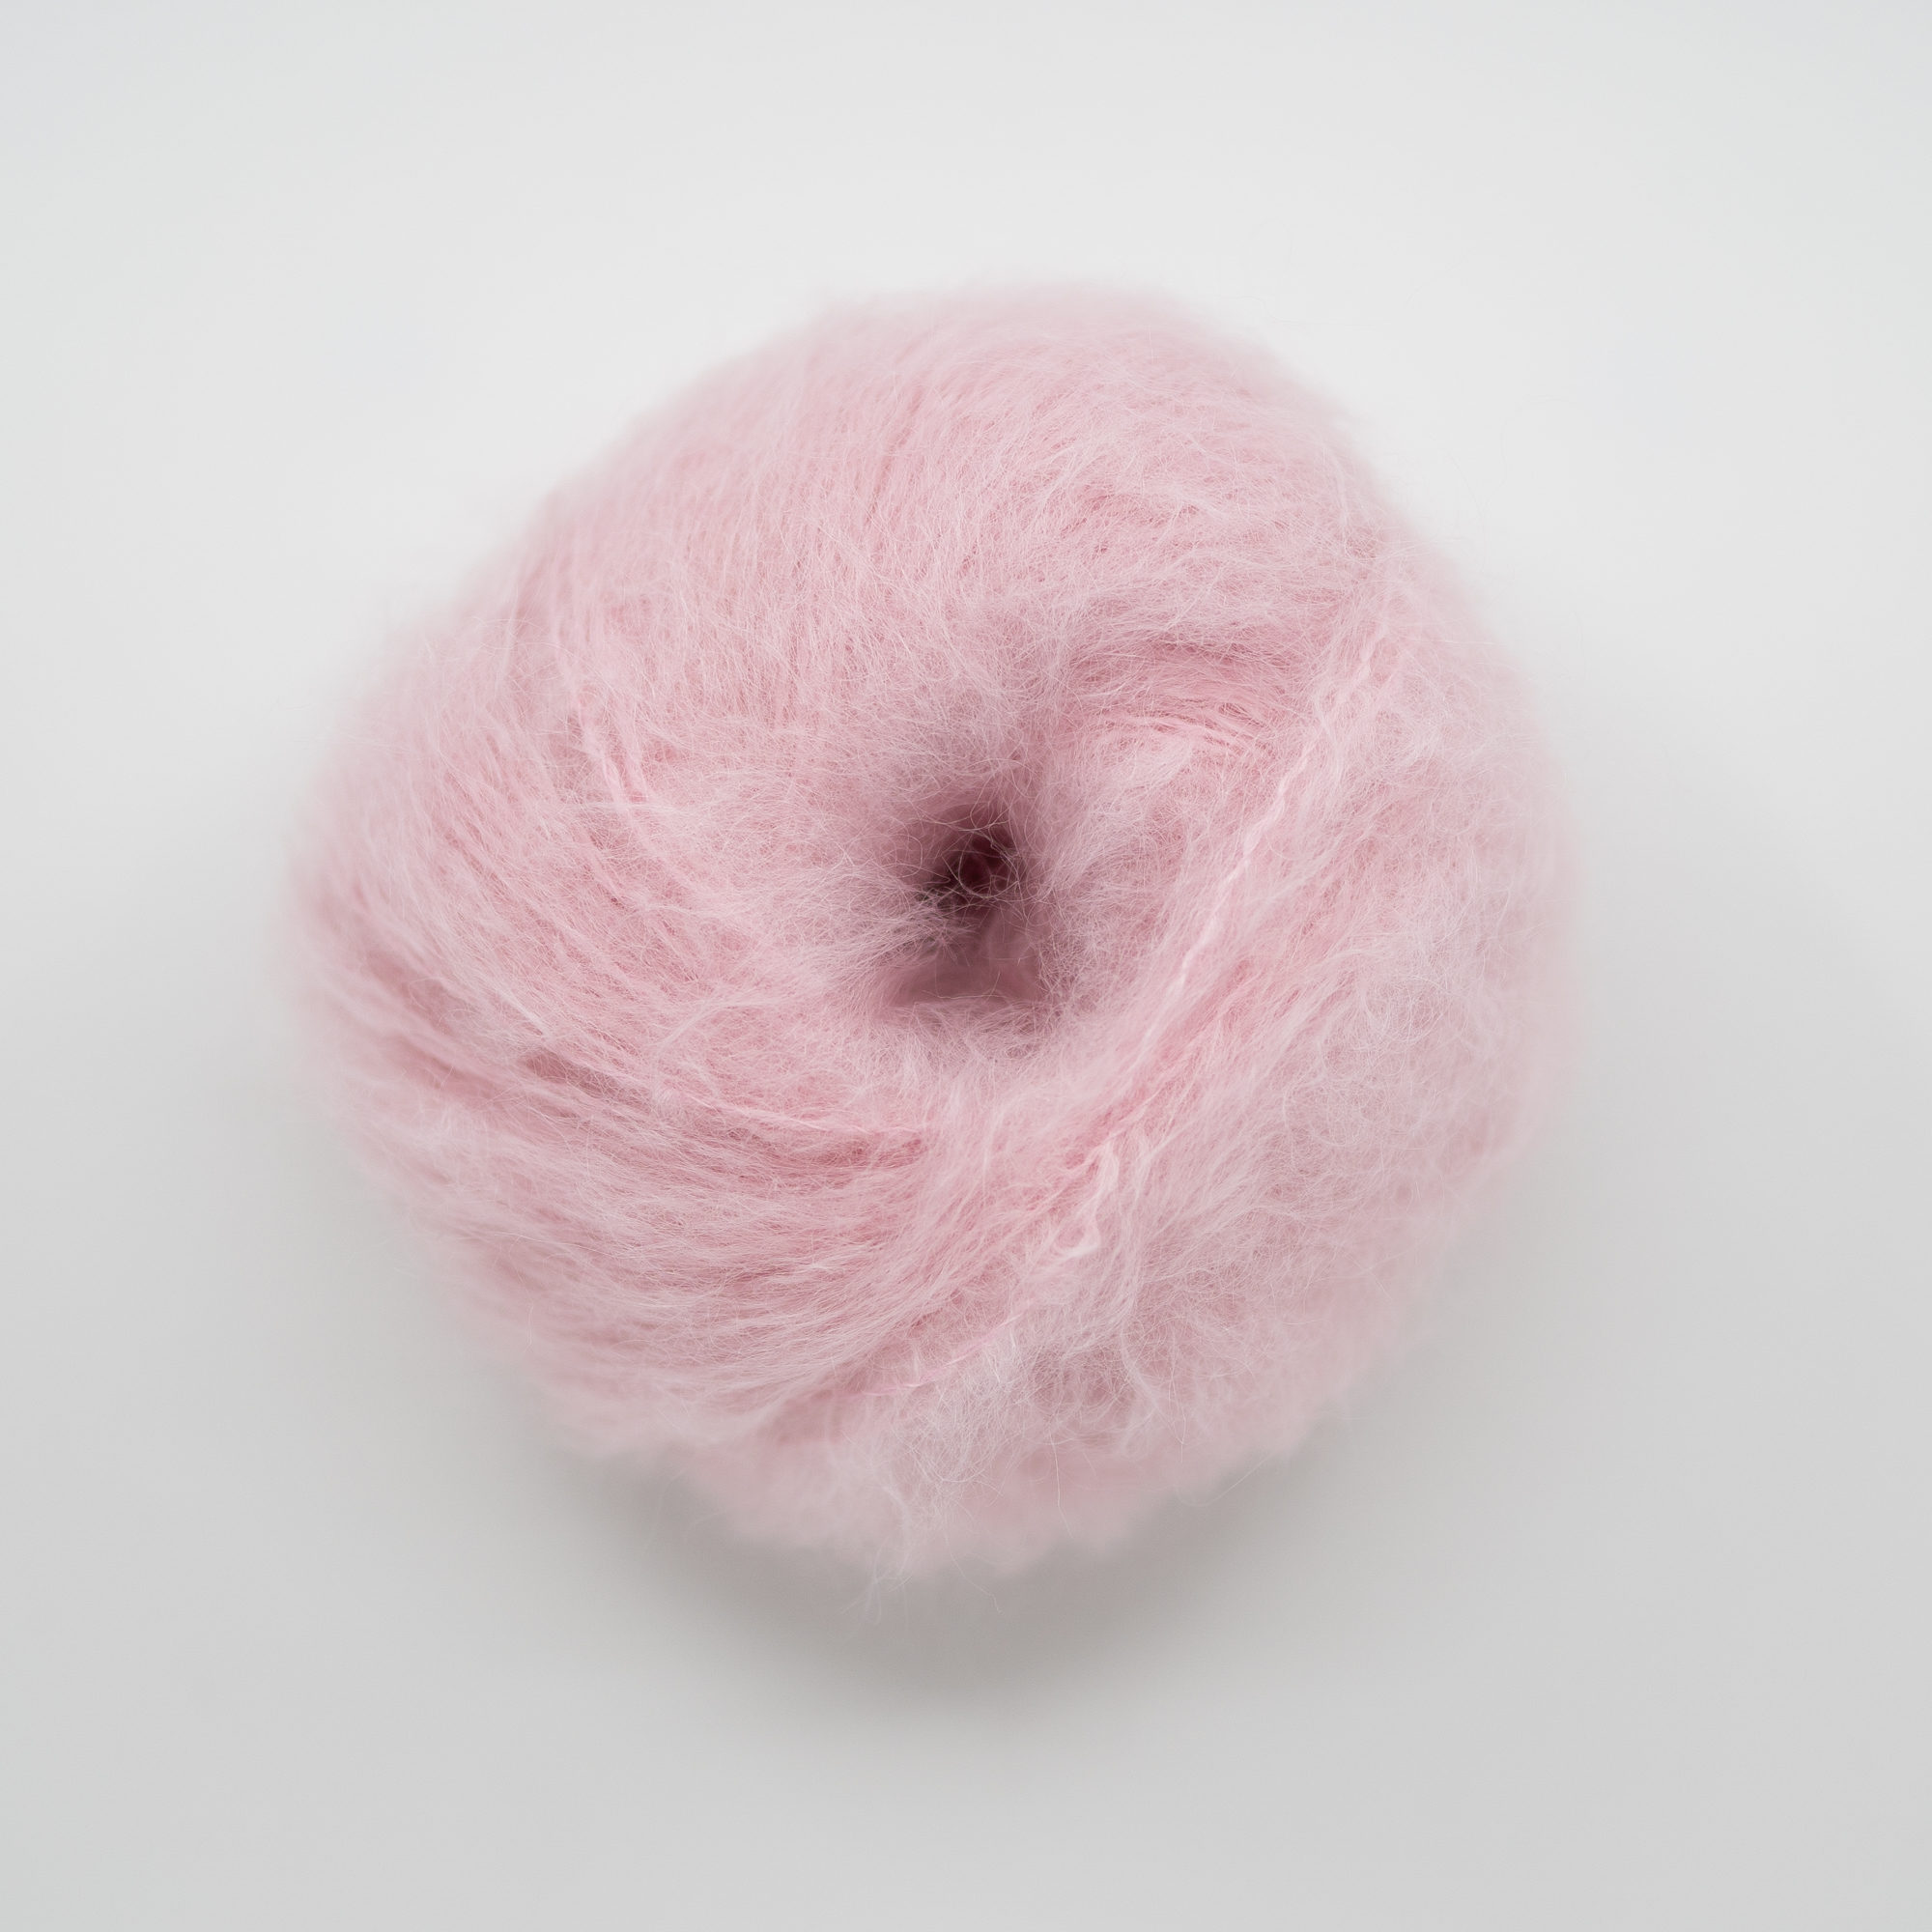  - Fairy tale pink | Pastel pink mohair yarn | Fluff - by HipKnitShop - 15/06/2020